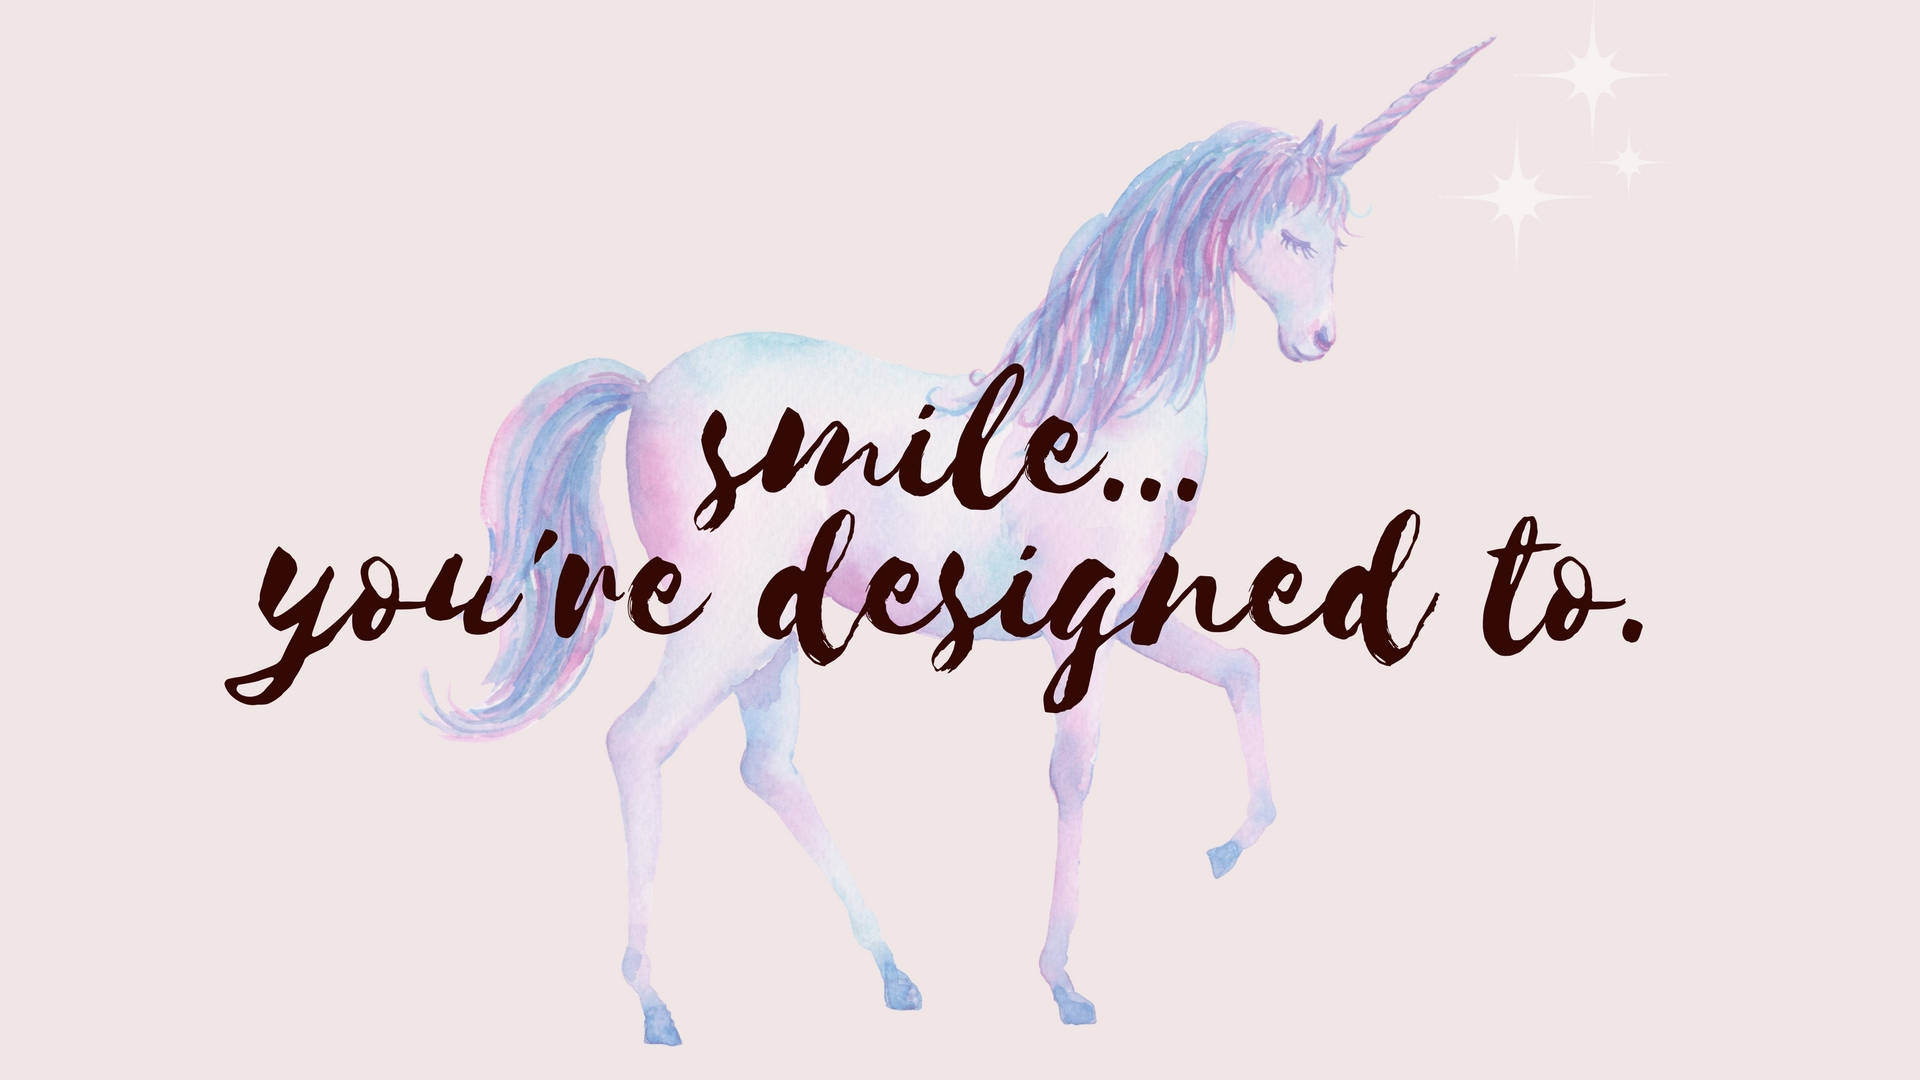 Download Designed To Smile Quote Wallpaper | Wallpapers.com